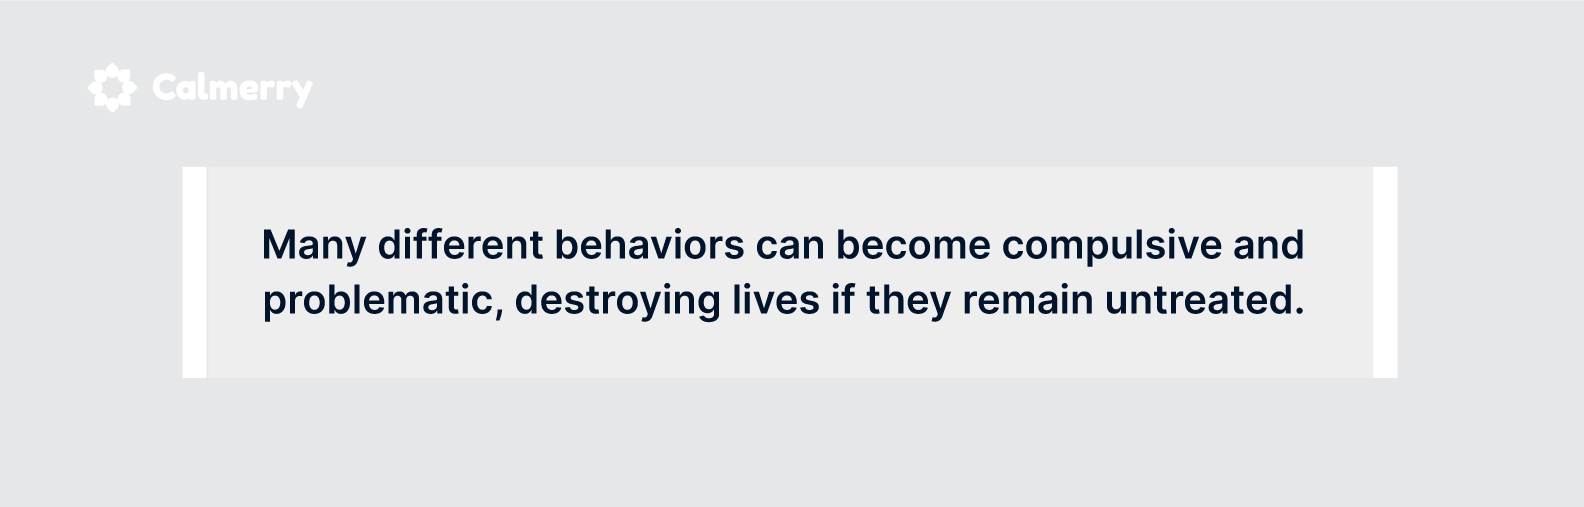 Many different behaviors can become compulsive and problematic